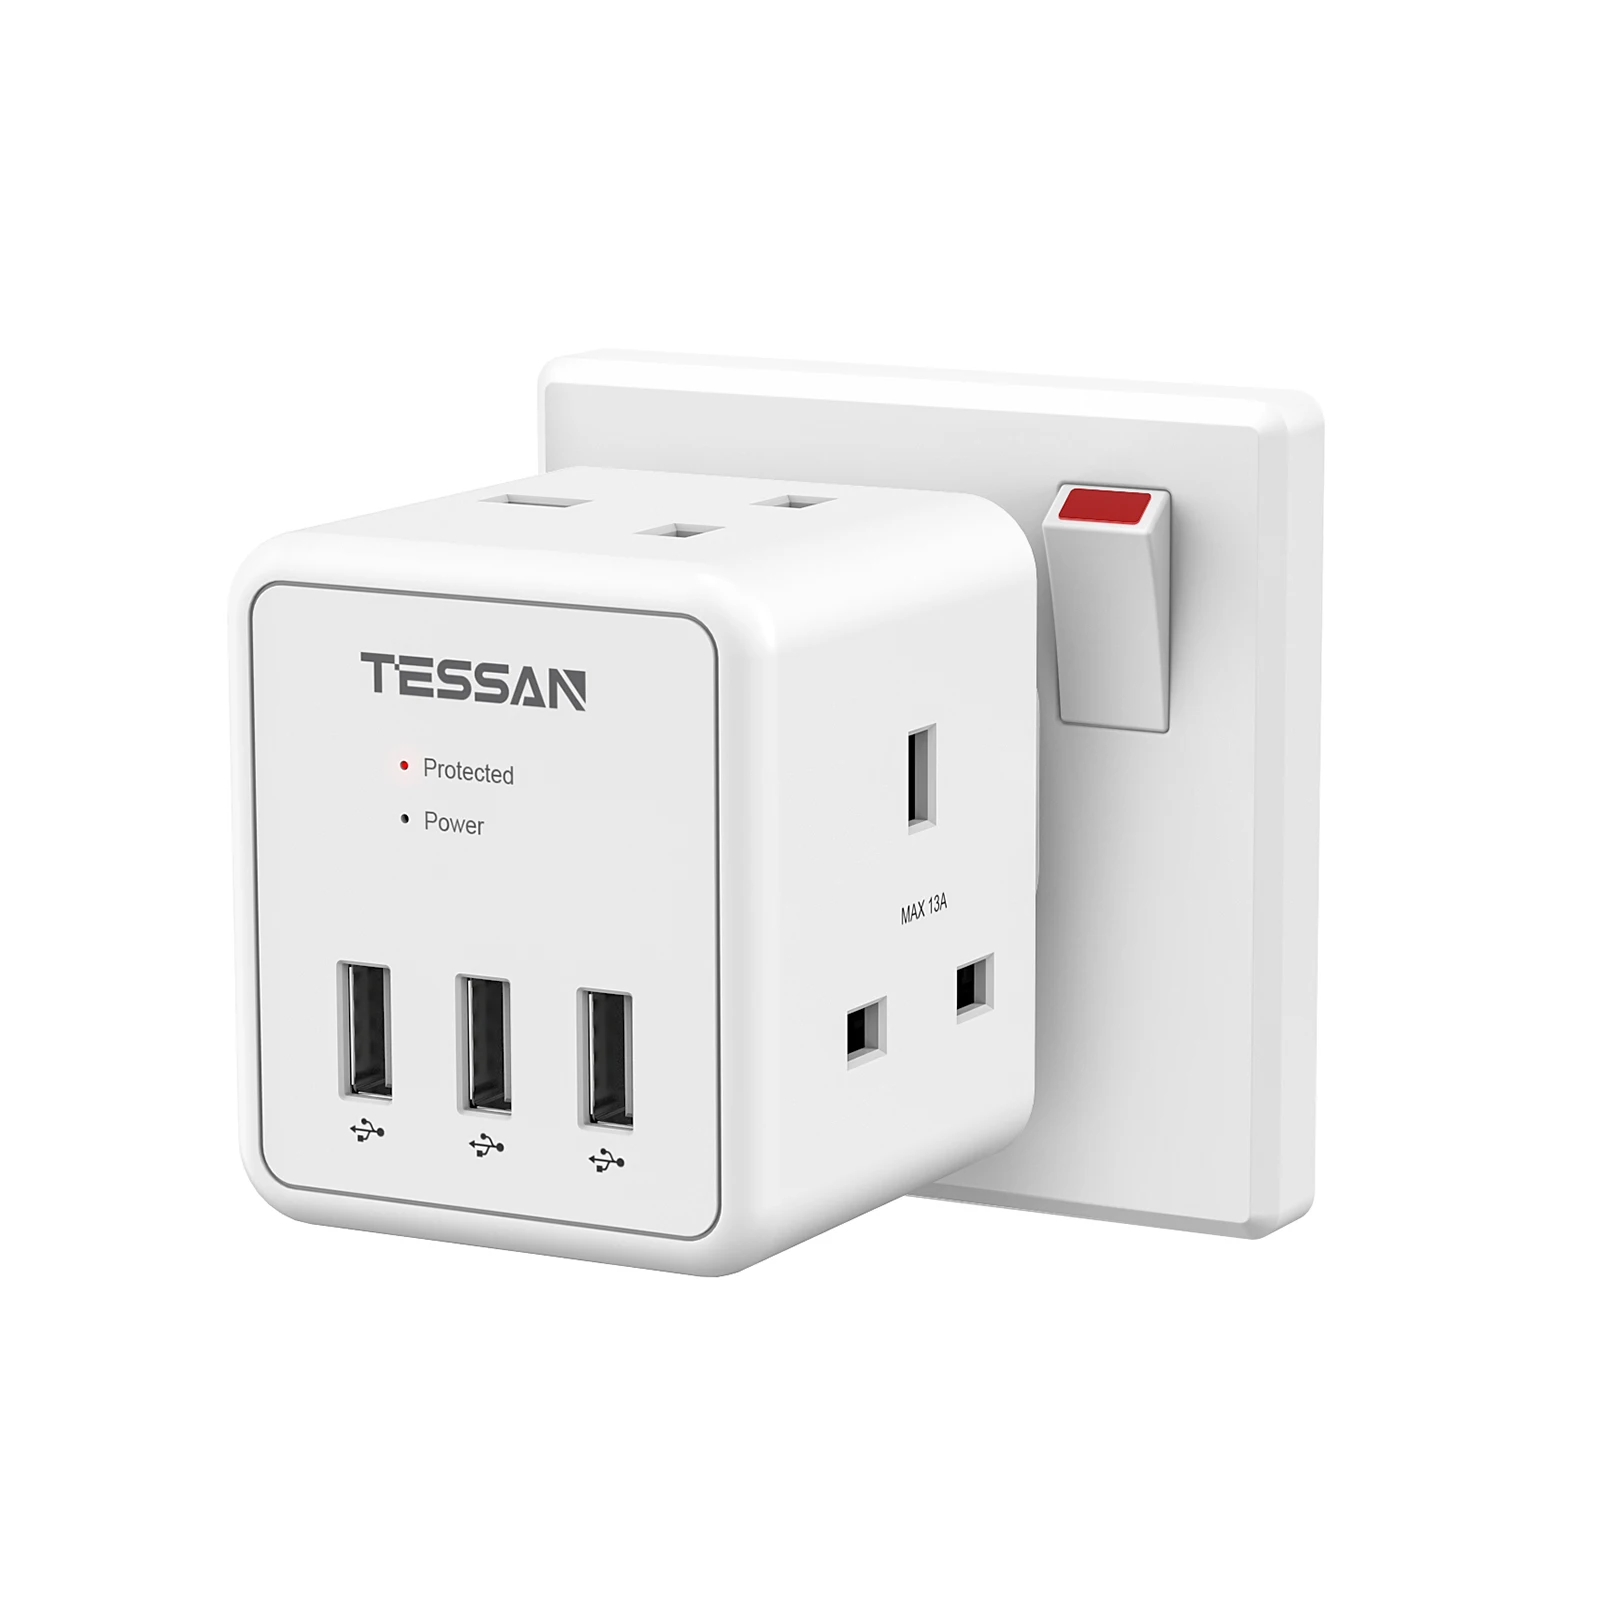 

TESSAN UK Plug Adapter Surge Protection 2 Way Outlets with 3 USB Ports 13A Cube Multi Plug Extension Wall Socket for Home Office